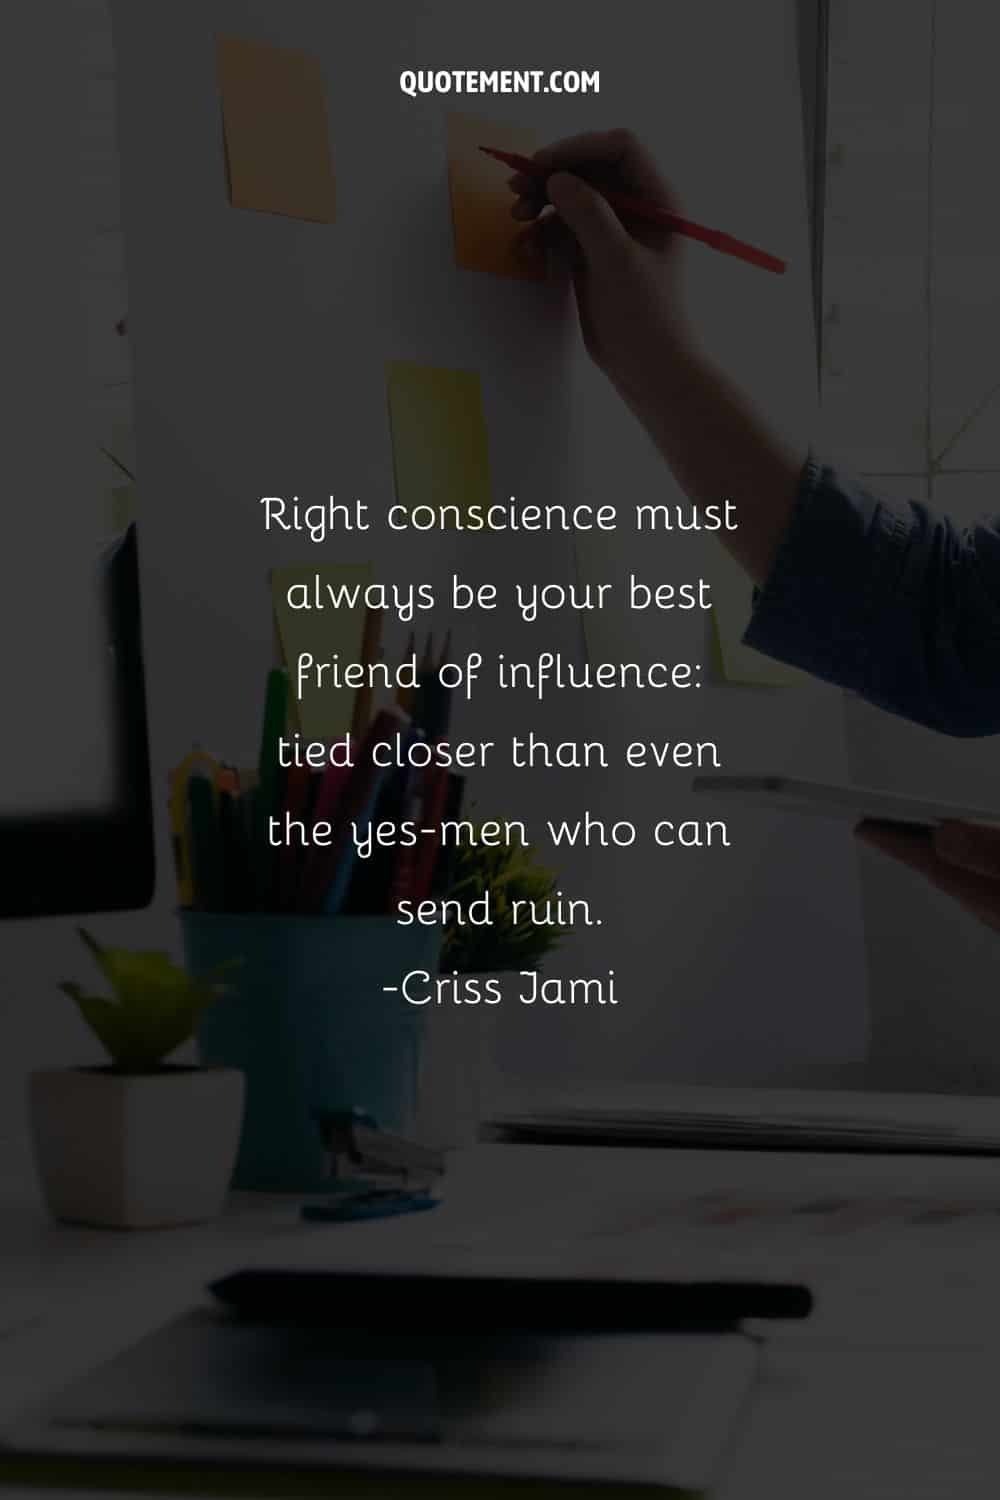 Right conscience must always be your best friend of influence